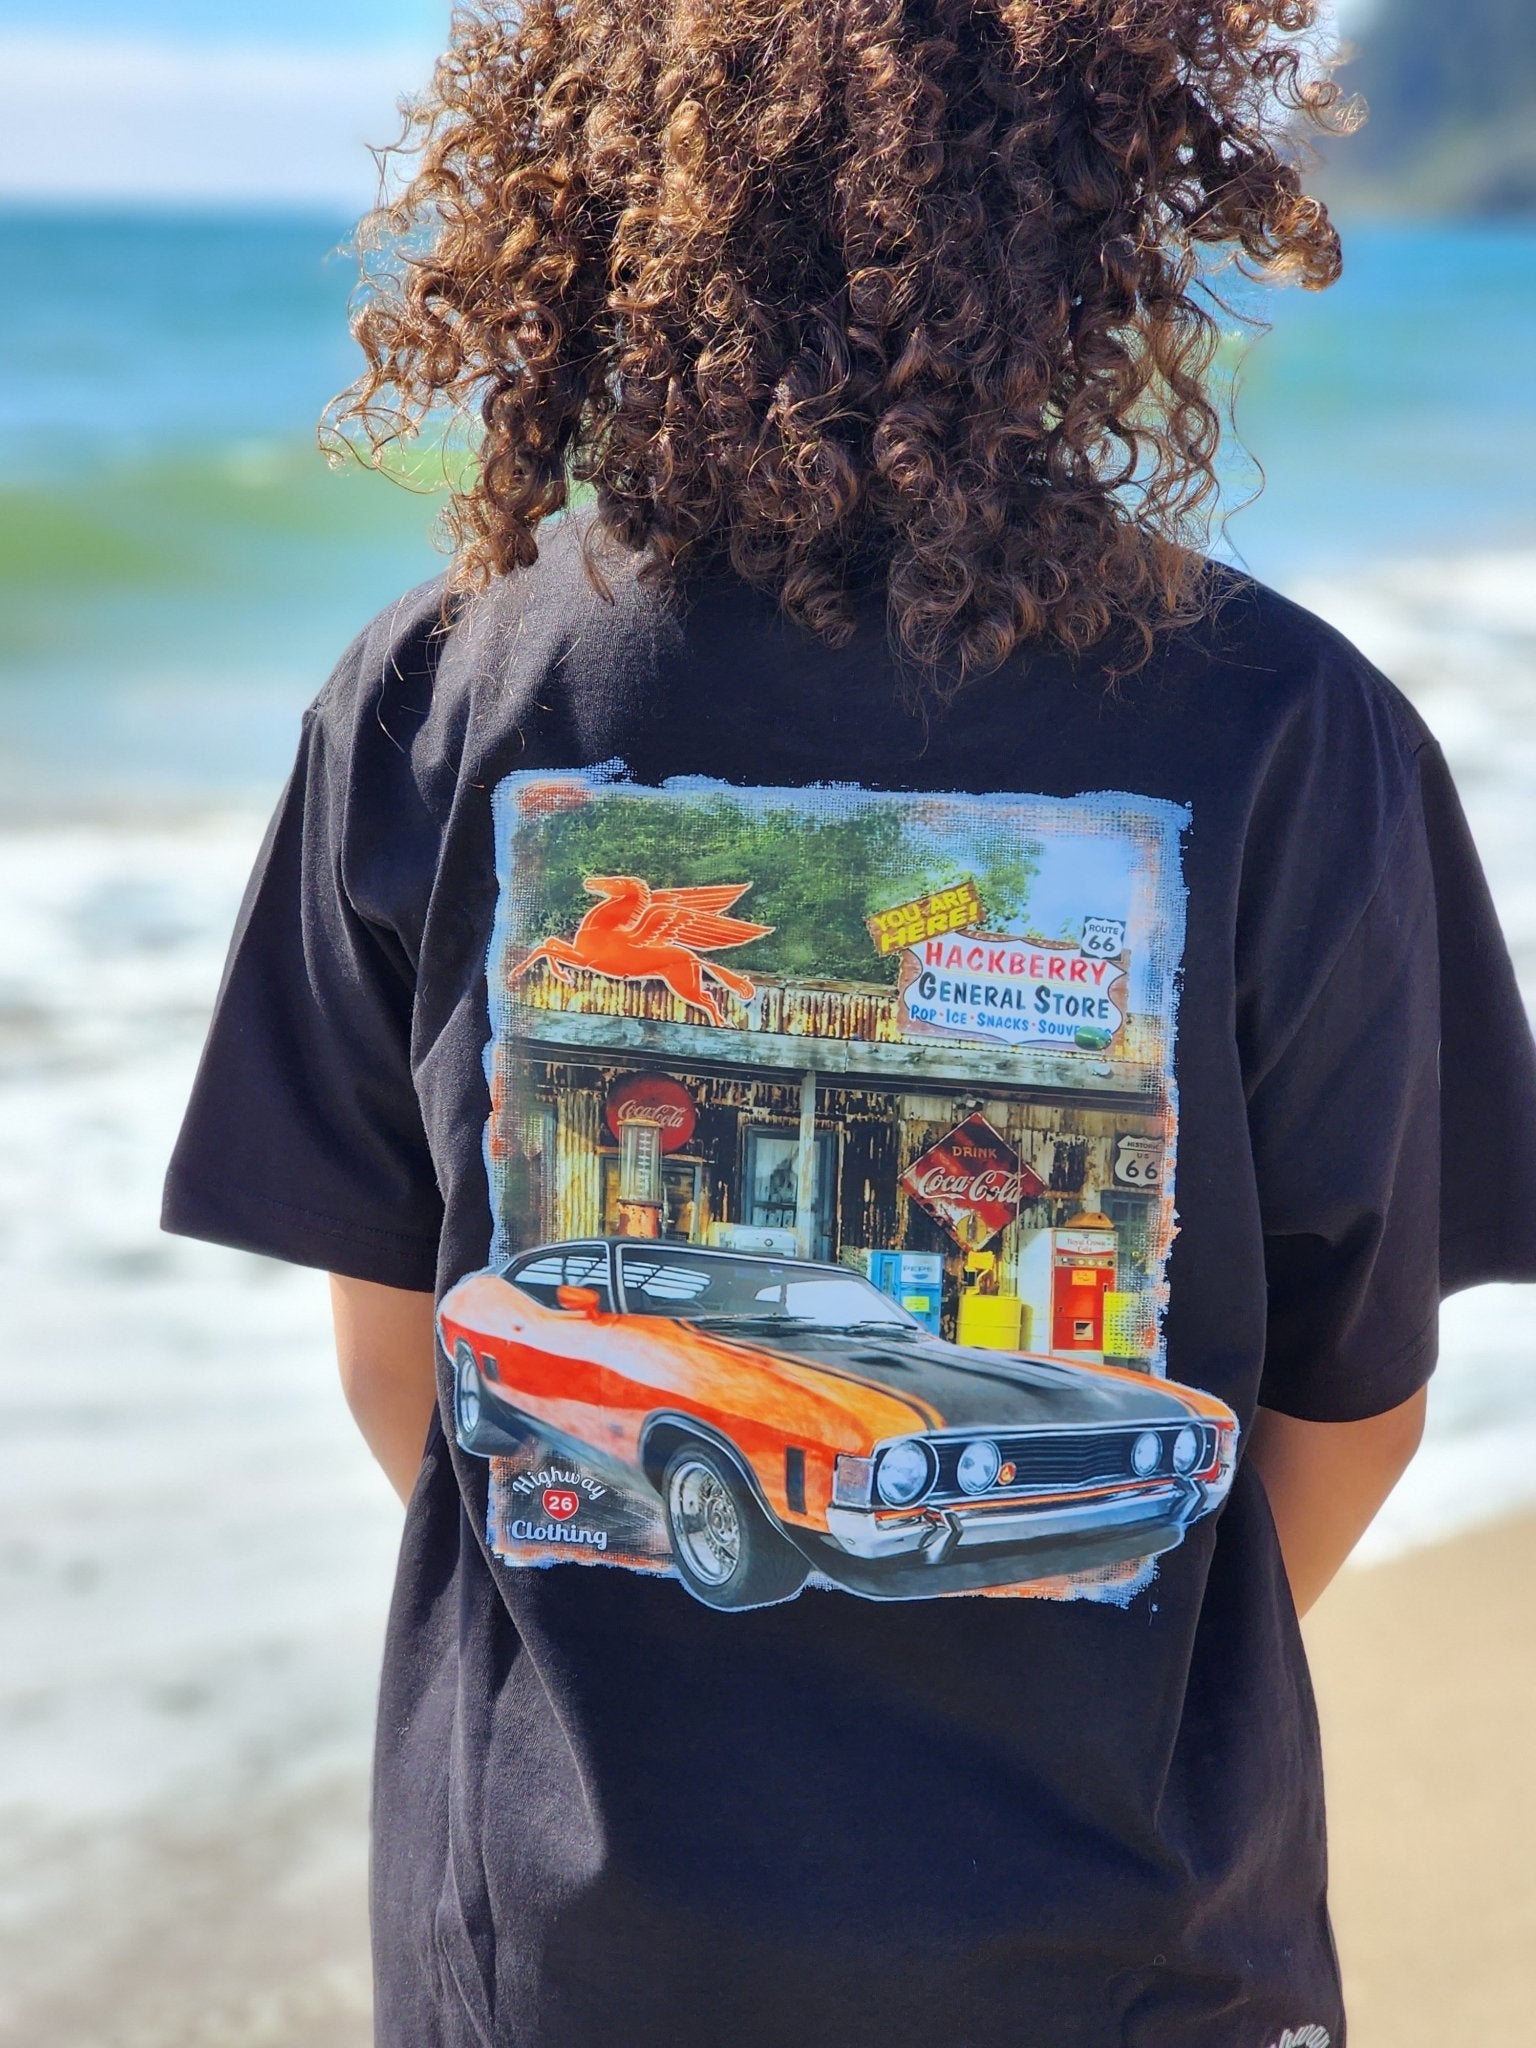 Hackberry Muscle Car - Highway 26 Clothing